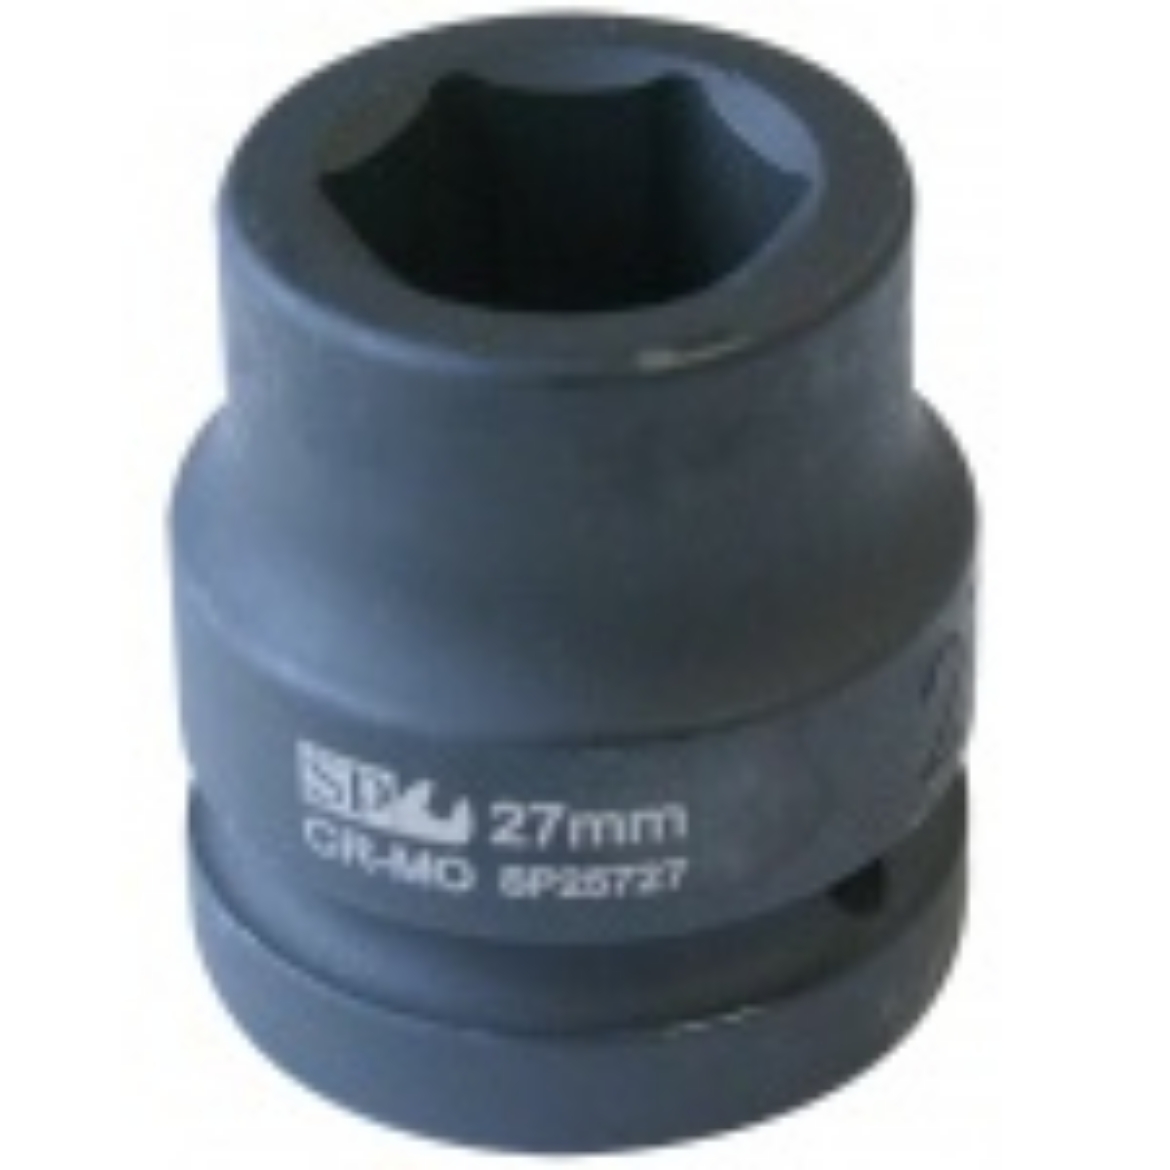 Picture of SOCKET IMPACT 1"DR 6PT METRIC 53MM SP TOOLS